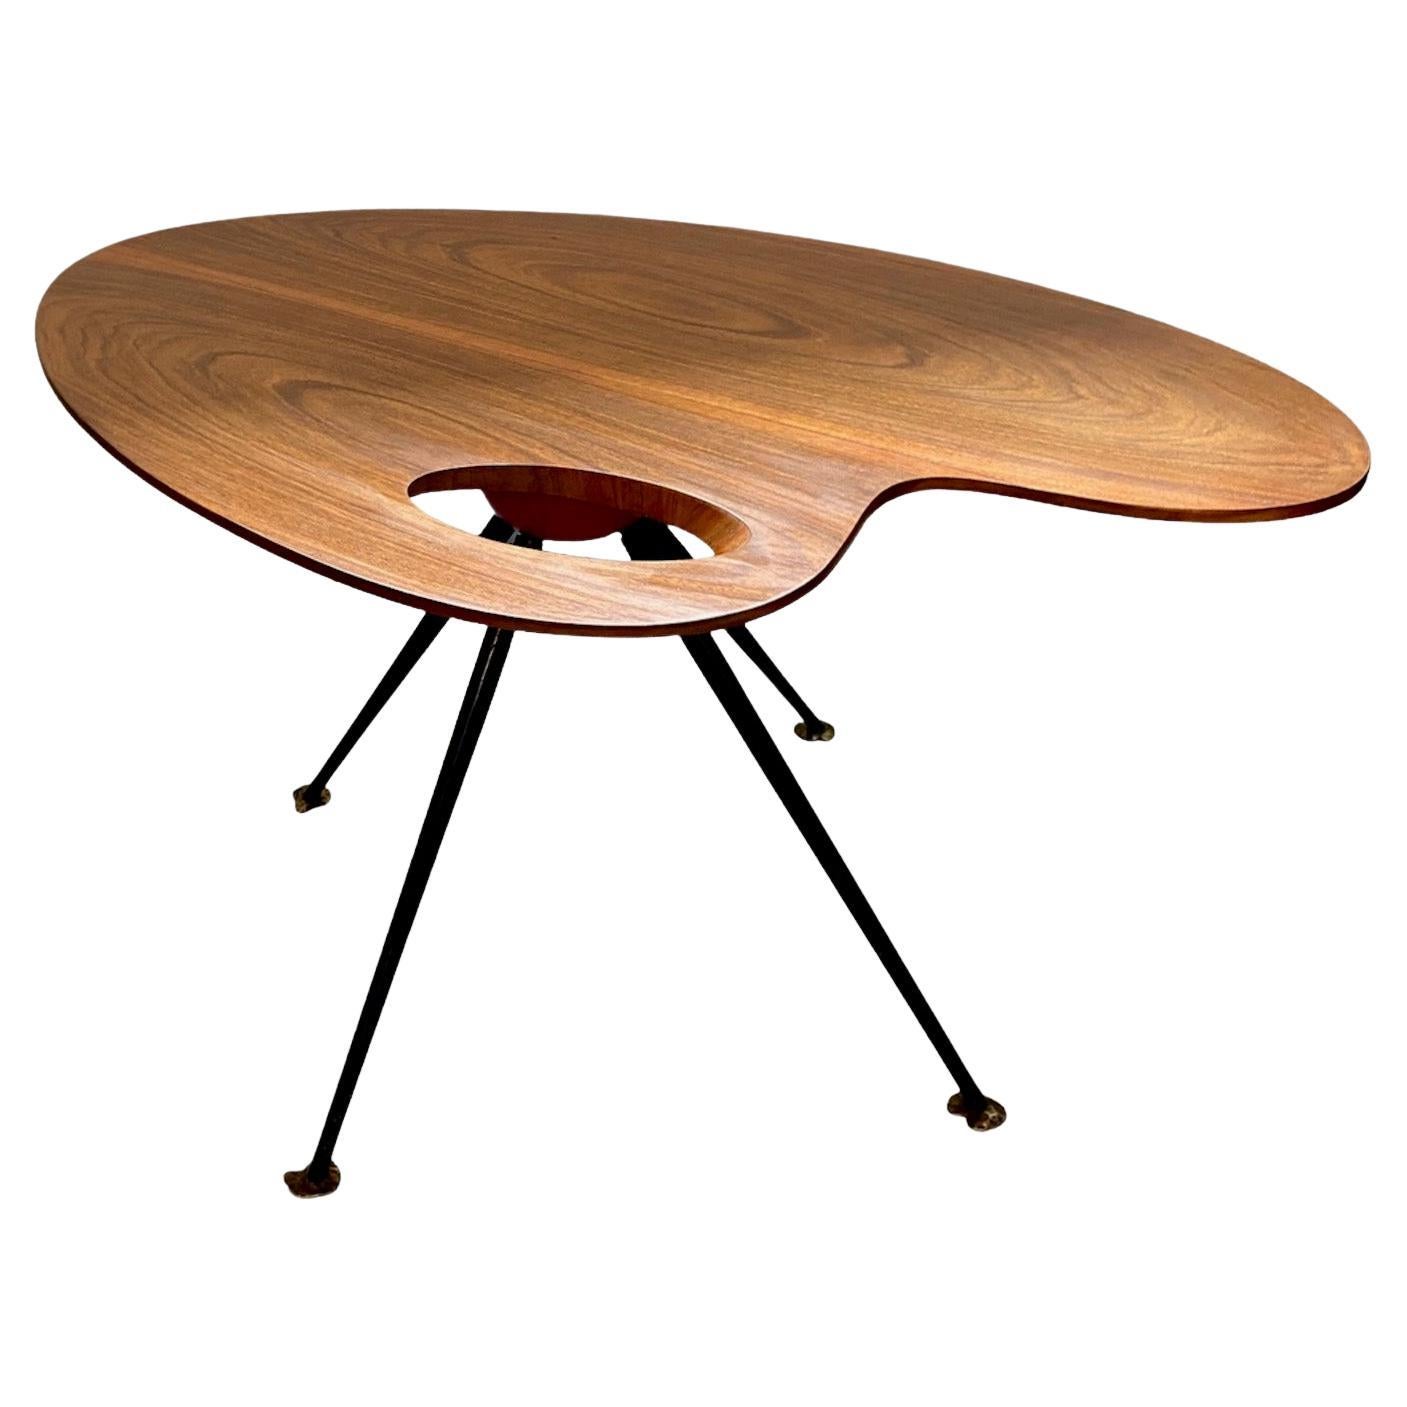 20th Century Midcentury Organic Shaped Coffee Table in the Manner of Gio Ponti, circa 1950s For Sale